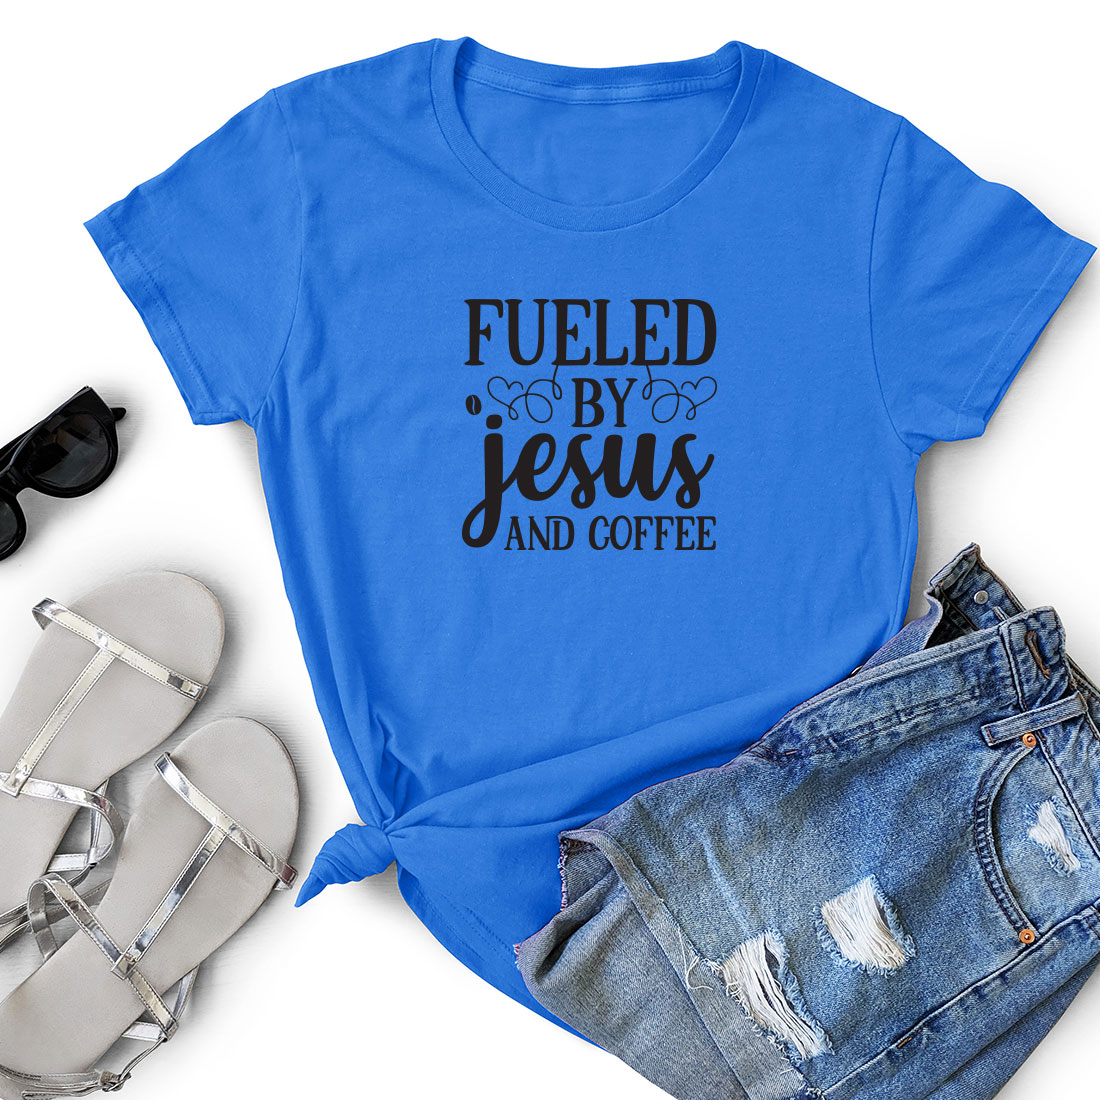 T - shirt that says fueled by jesus and coffee.